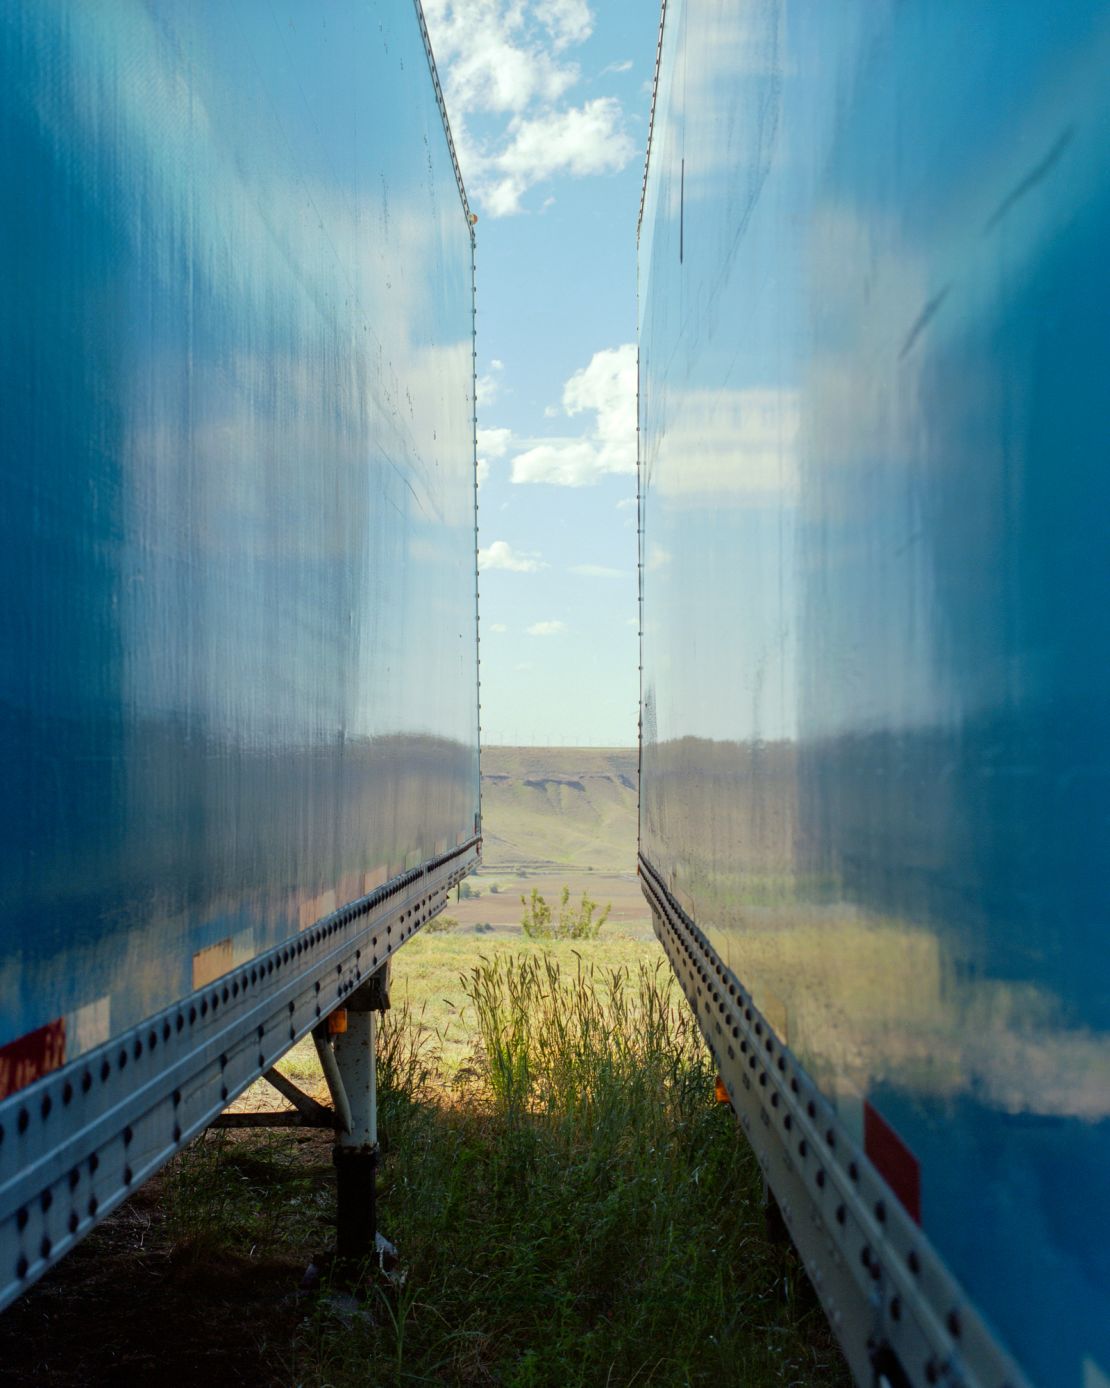 Horvath worked to capture a sense of place and mood around Bliss, and was drawn to this scene between two trucks for its visual illusion.